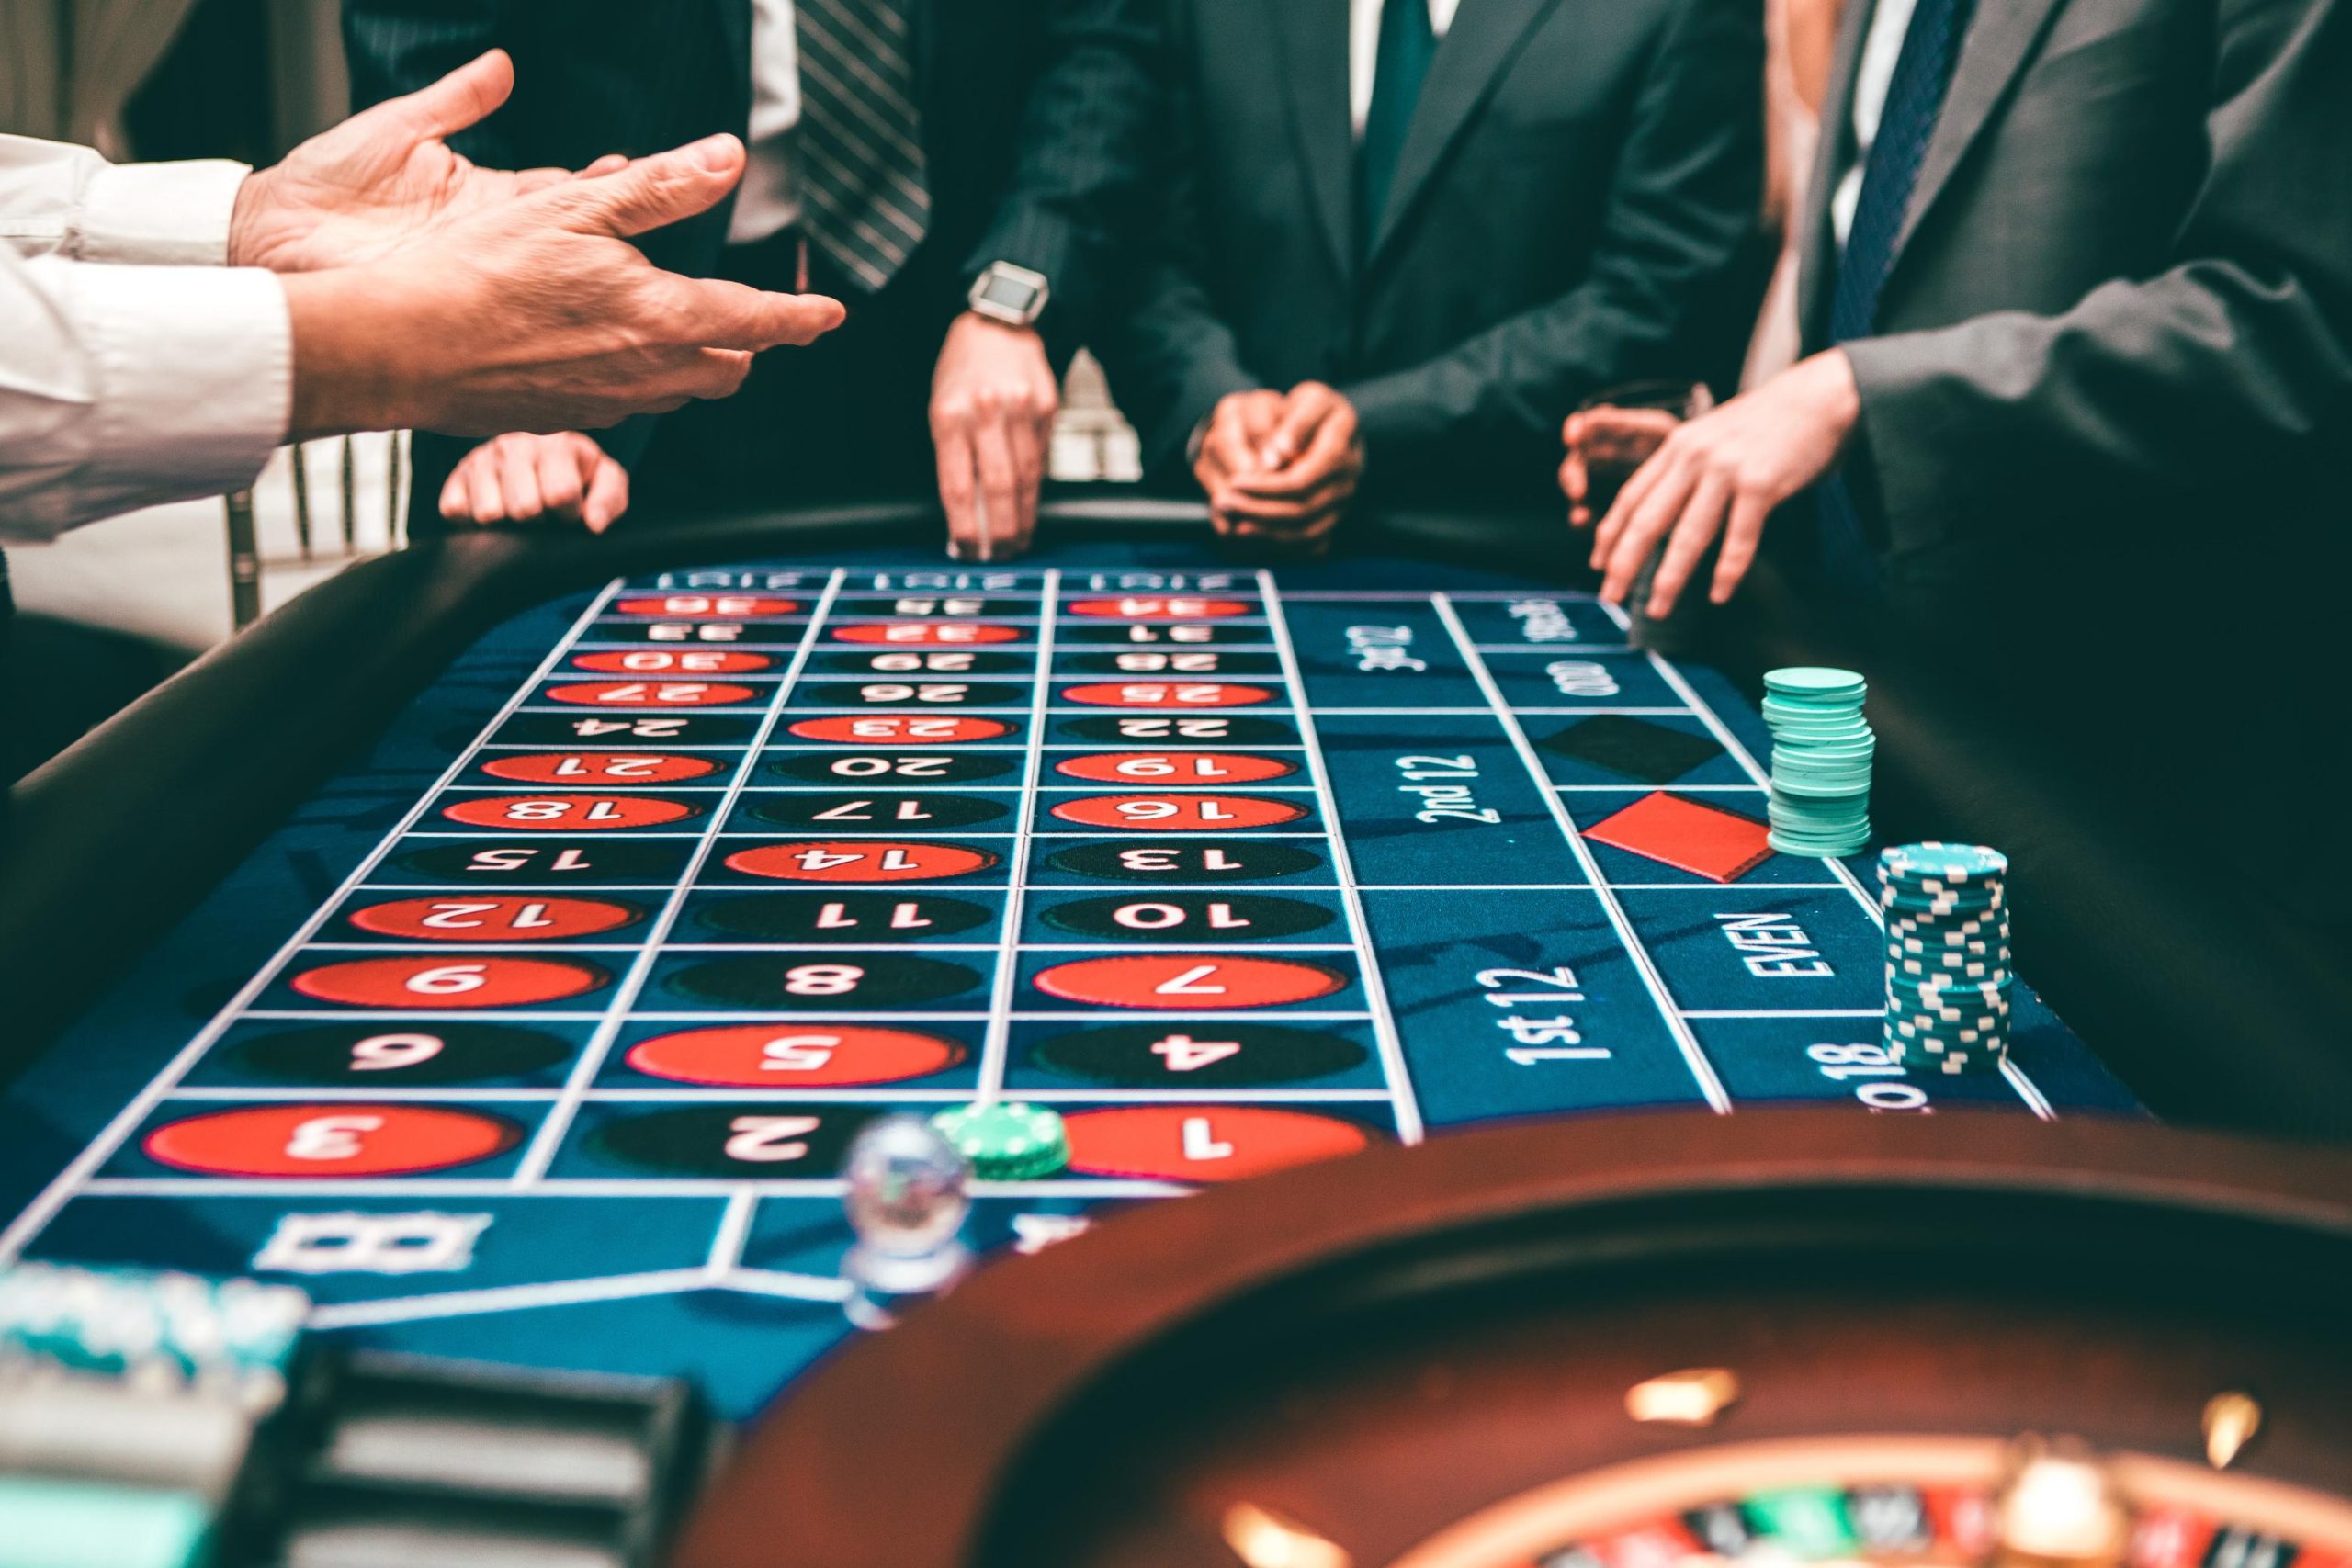 Casino Etiquette: Do’s and Don’ts When Visiting a Casino